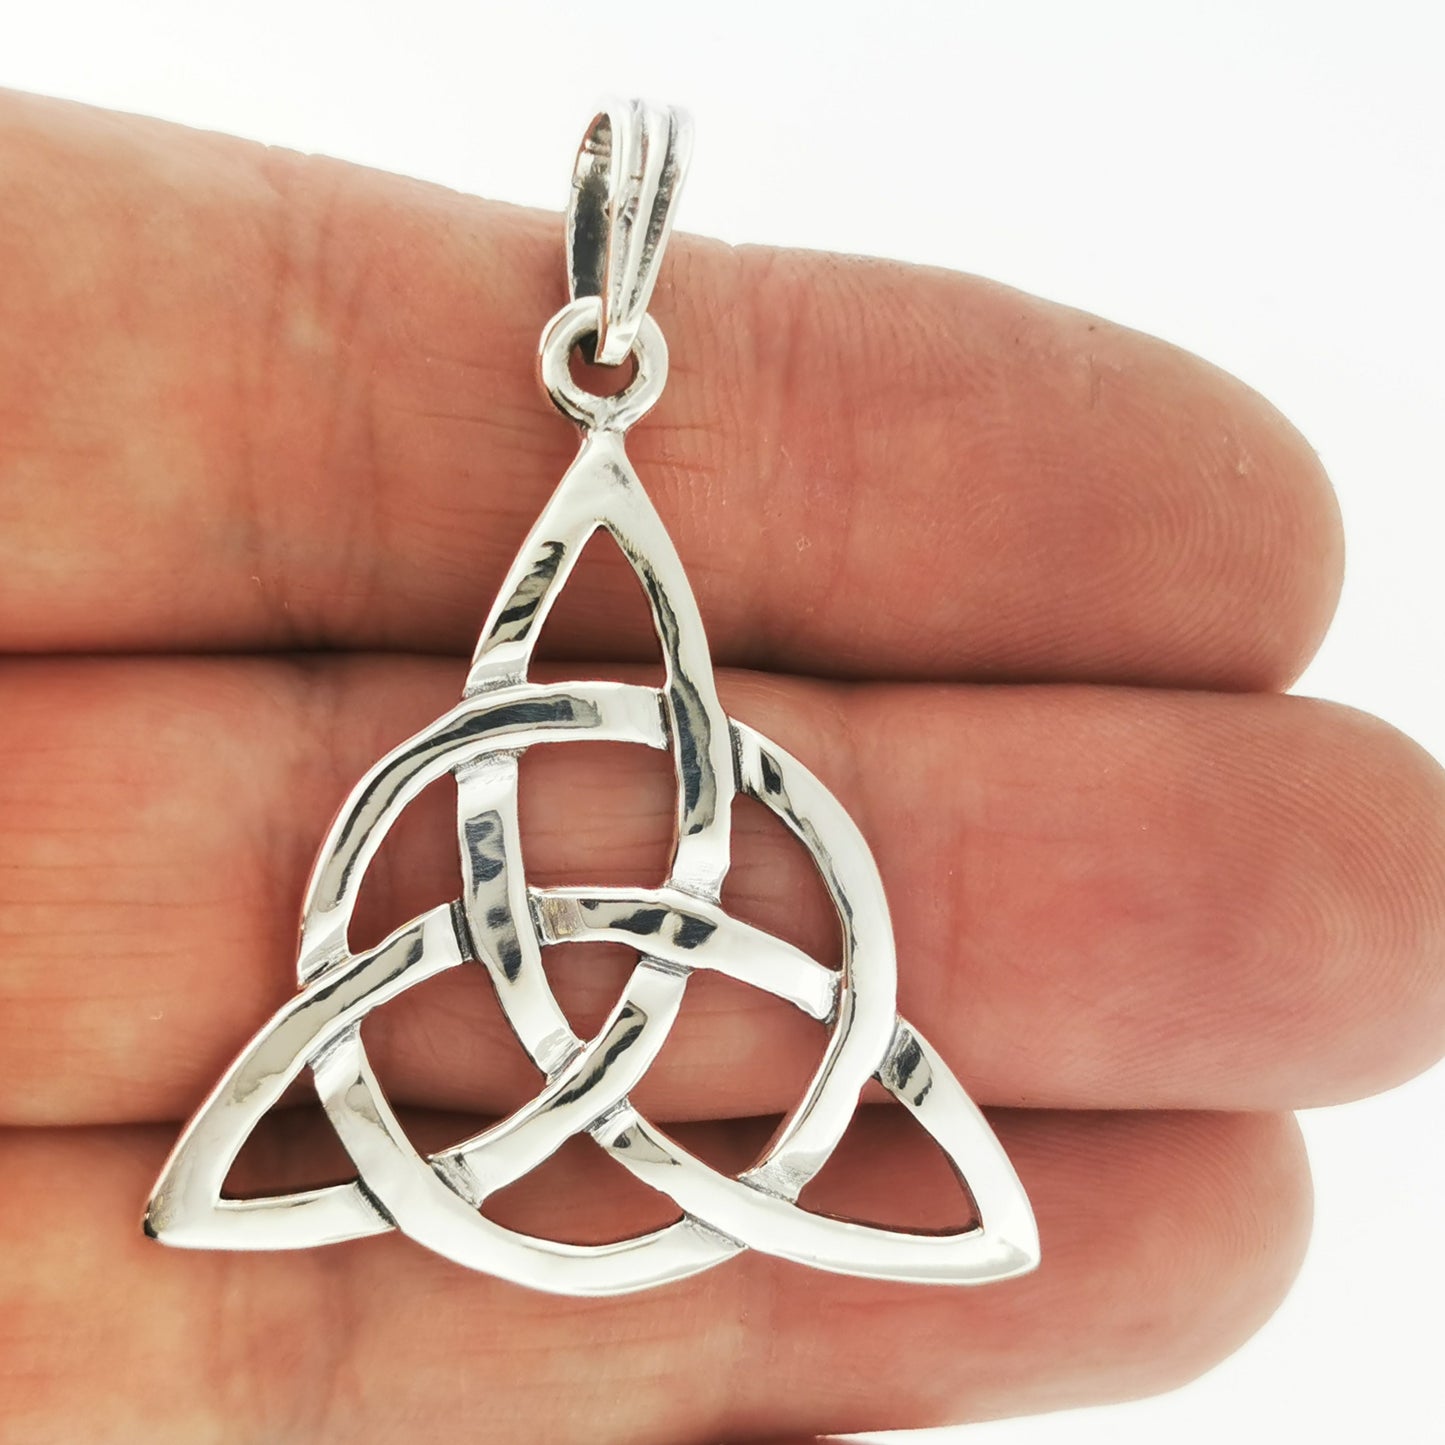 Large Triquetra Pendant in Sterling Silver or Antique Bronze, Celtic Triquetra Pendant, Sterling Silver Triquetra Pendant, Charmed Silver Necklace, Irish Triquetra Pendant, Triquetra Pendant In Sterling Silver, Silver Celtic Jewellery